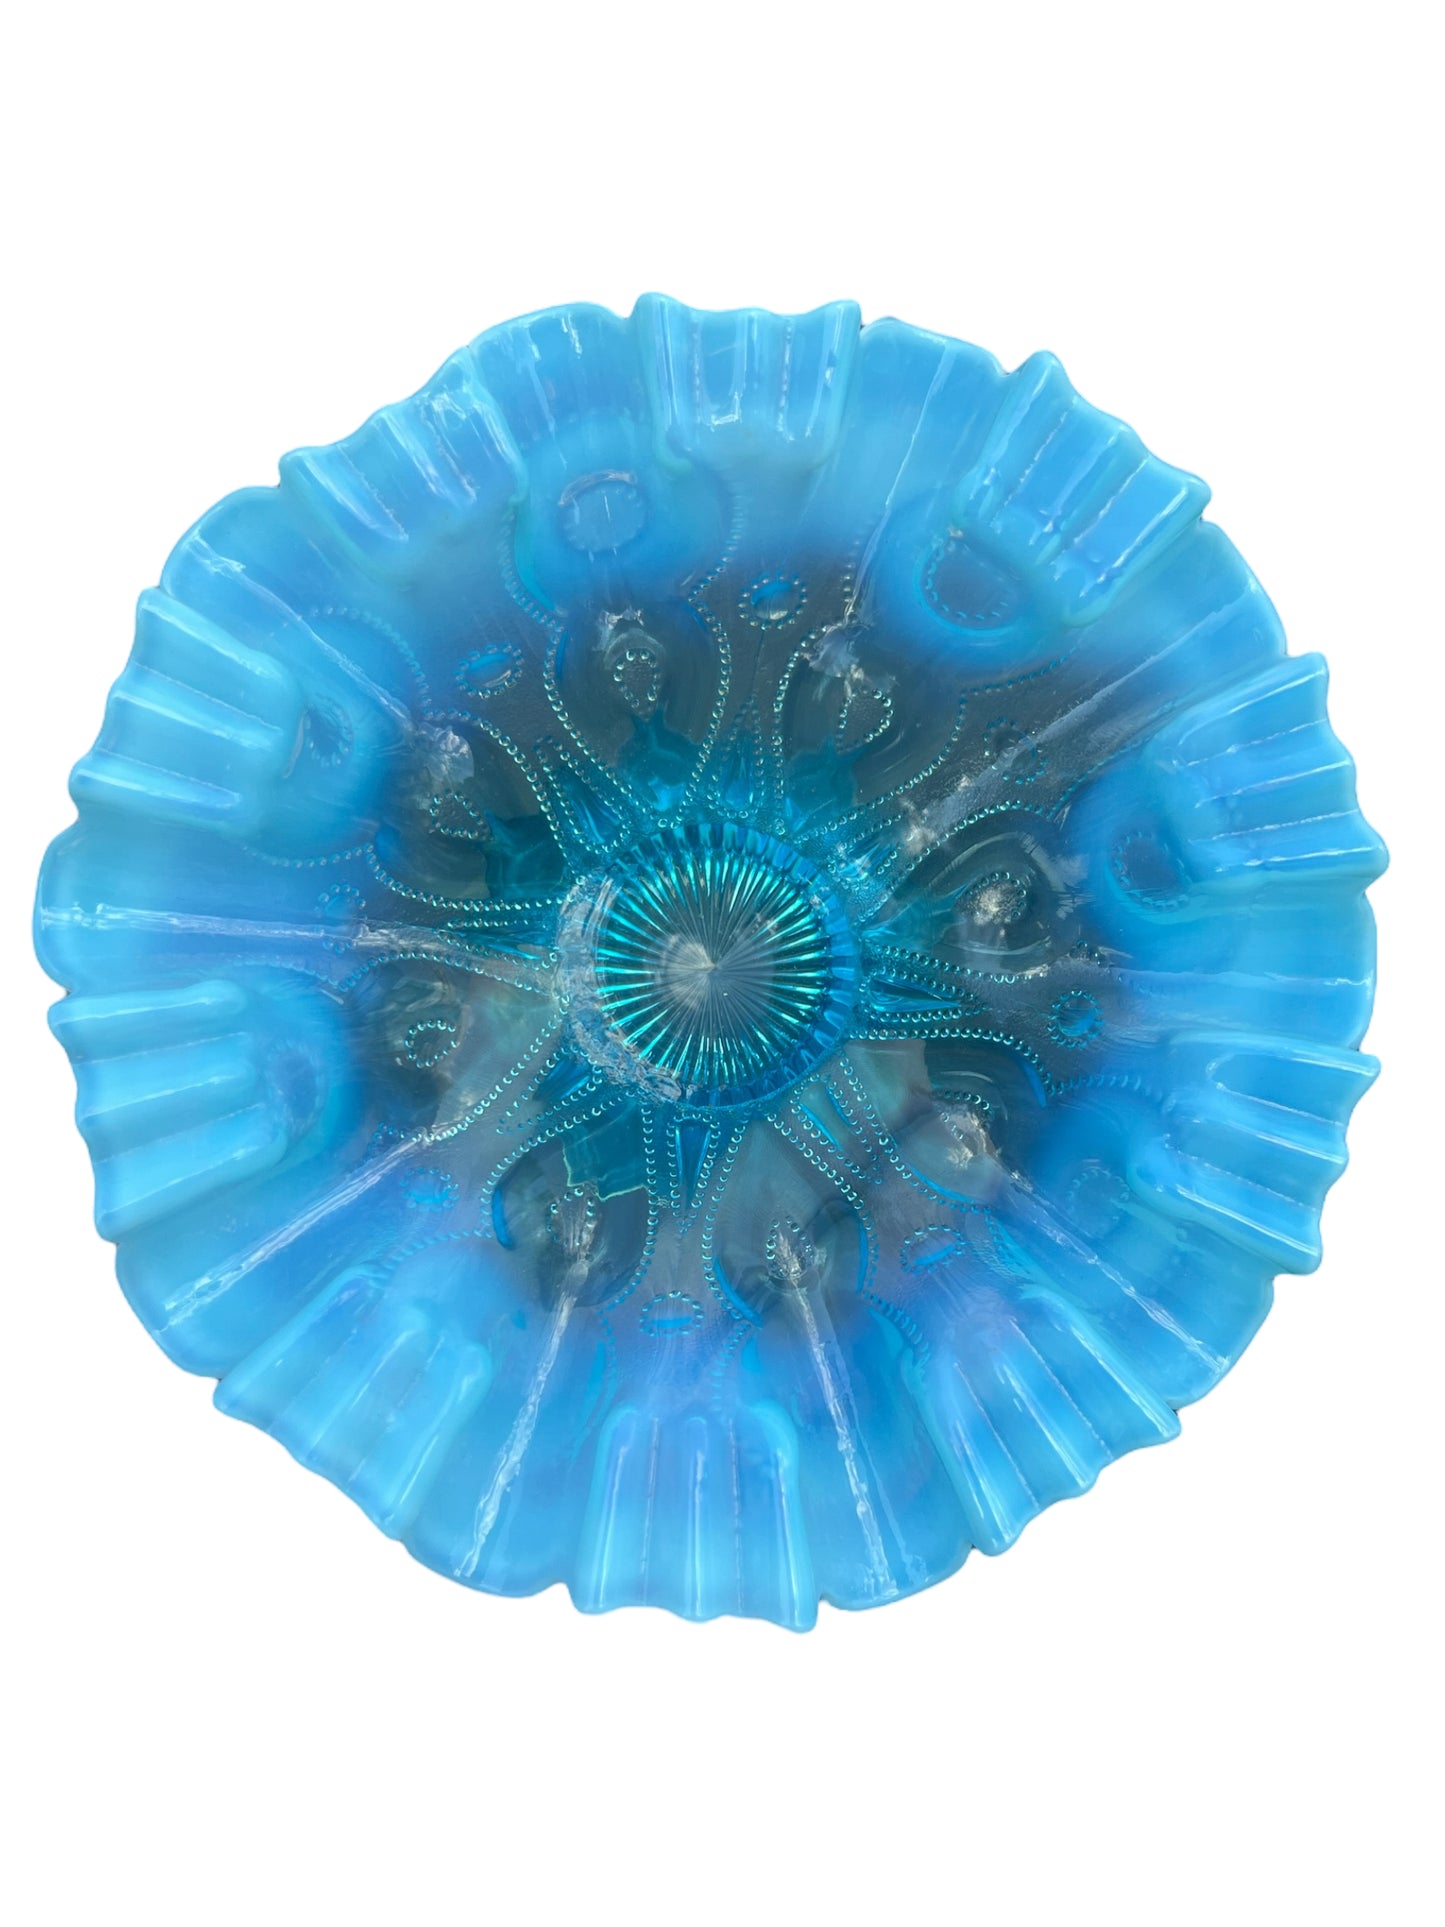 Antique Opalescent Dugan glass blue ruffled footed bowl